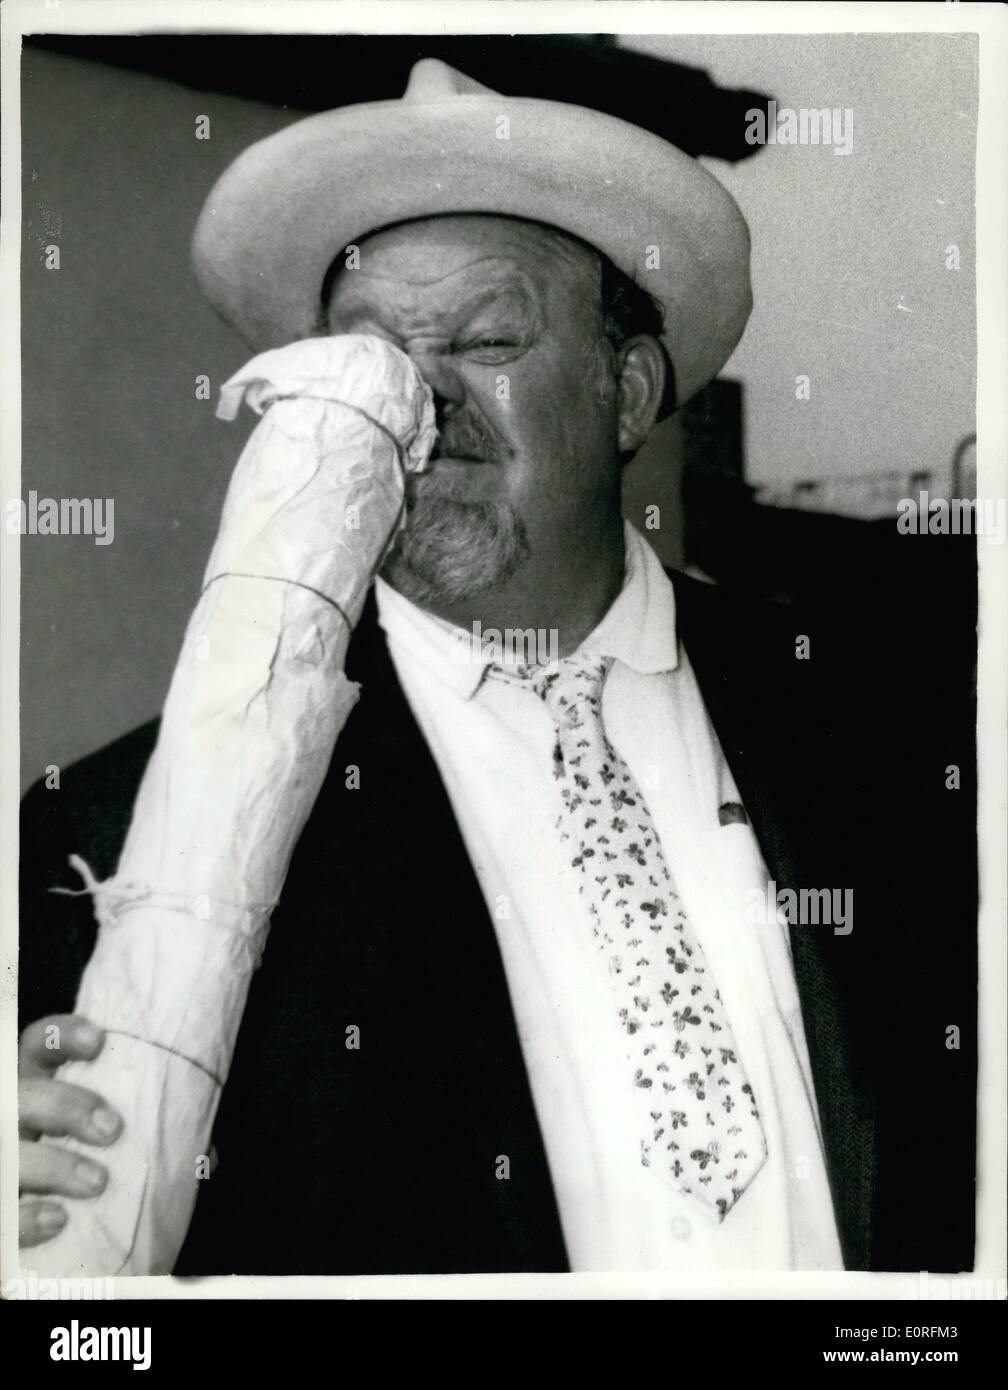 Jun. 06, 1959 - 6-6-59 Burl Ives arrives in London. Among the arrivals at London Airport yesterday was American singer-actor Burl Ives. He is to film here with Sir Alec Guinness in Our Man in Havana . Keystone Photo Shows: Burl Ives sniffs at a salami on arrival at London Airport yesterday. Stock Photo